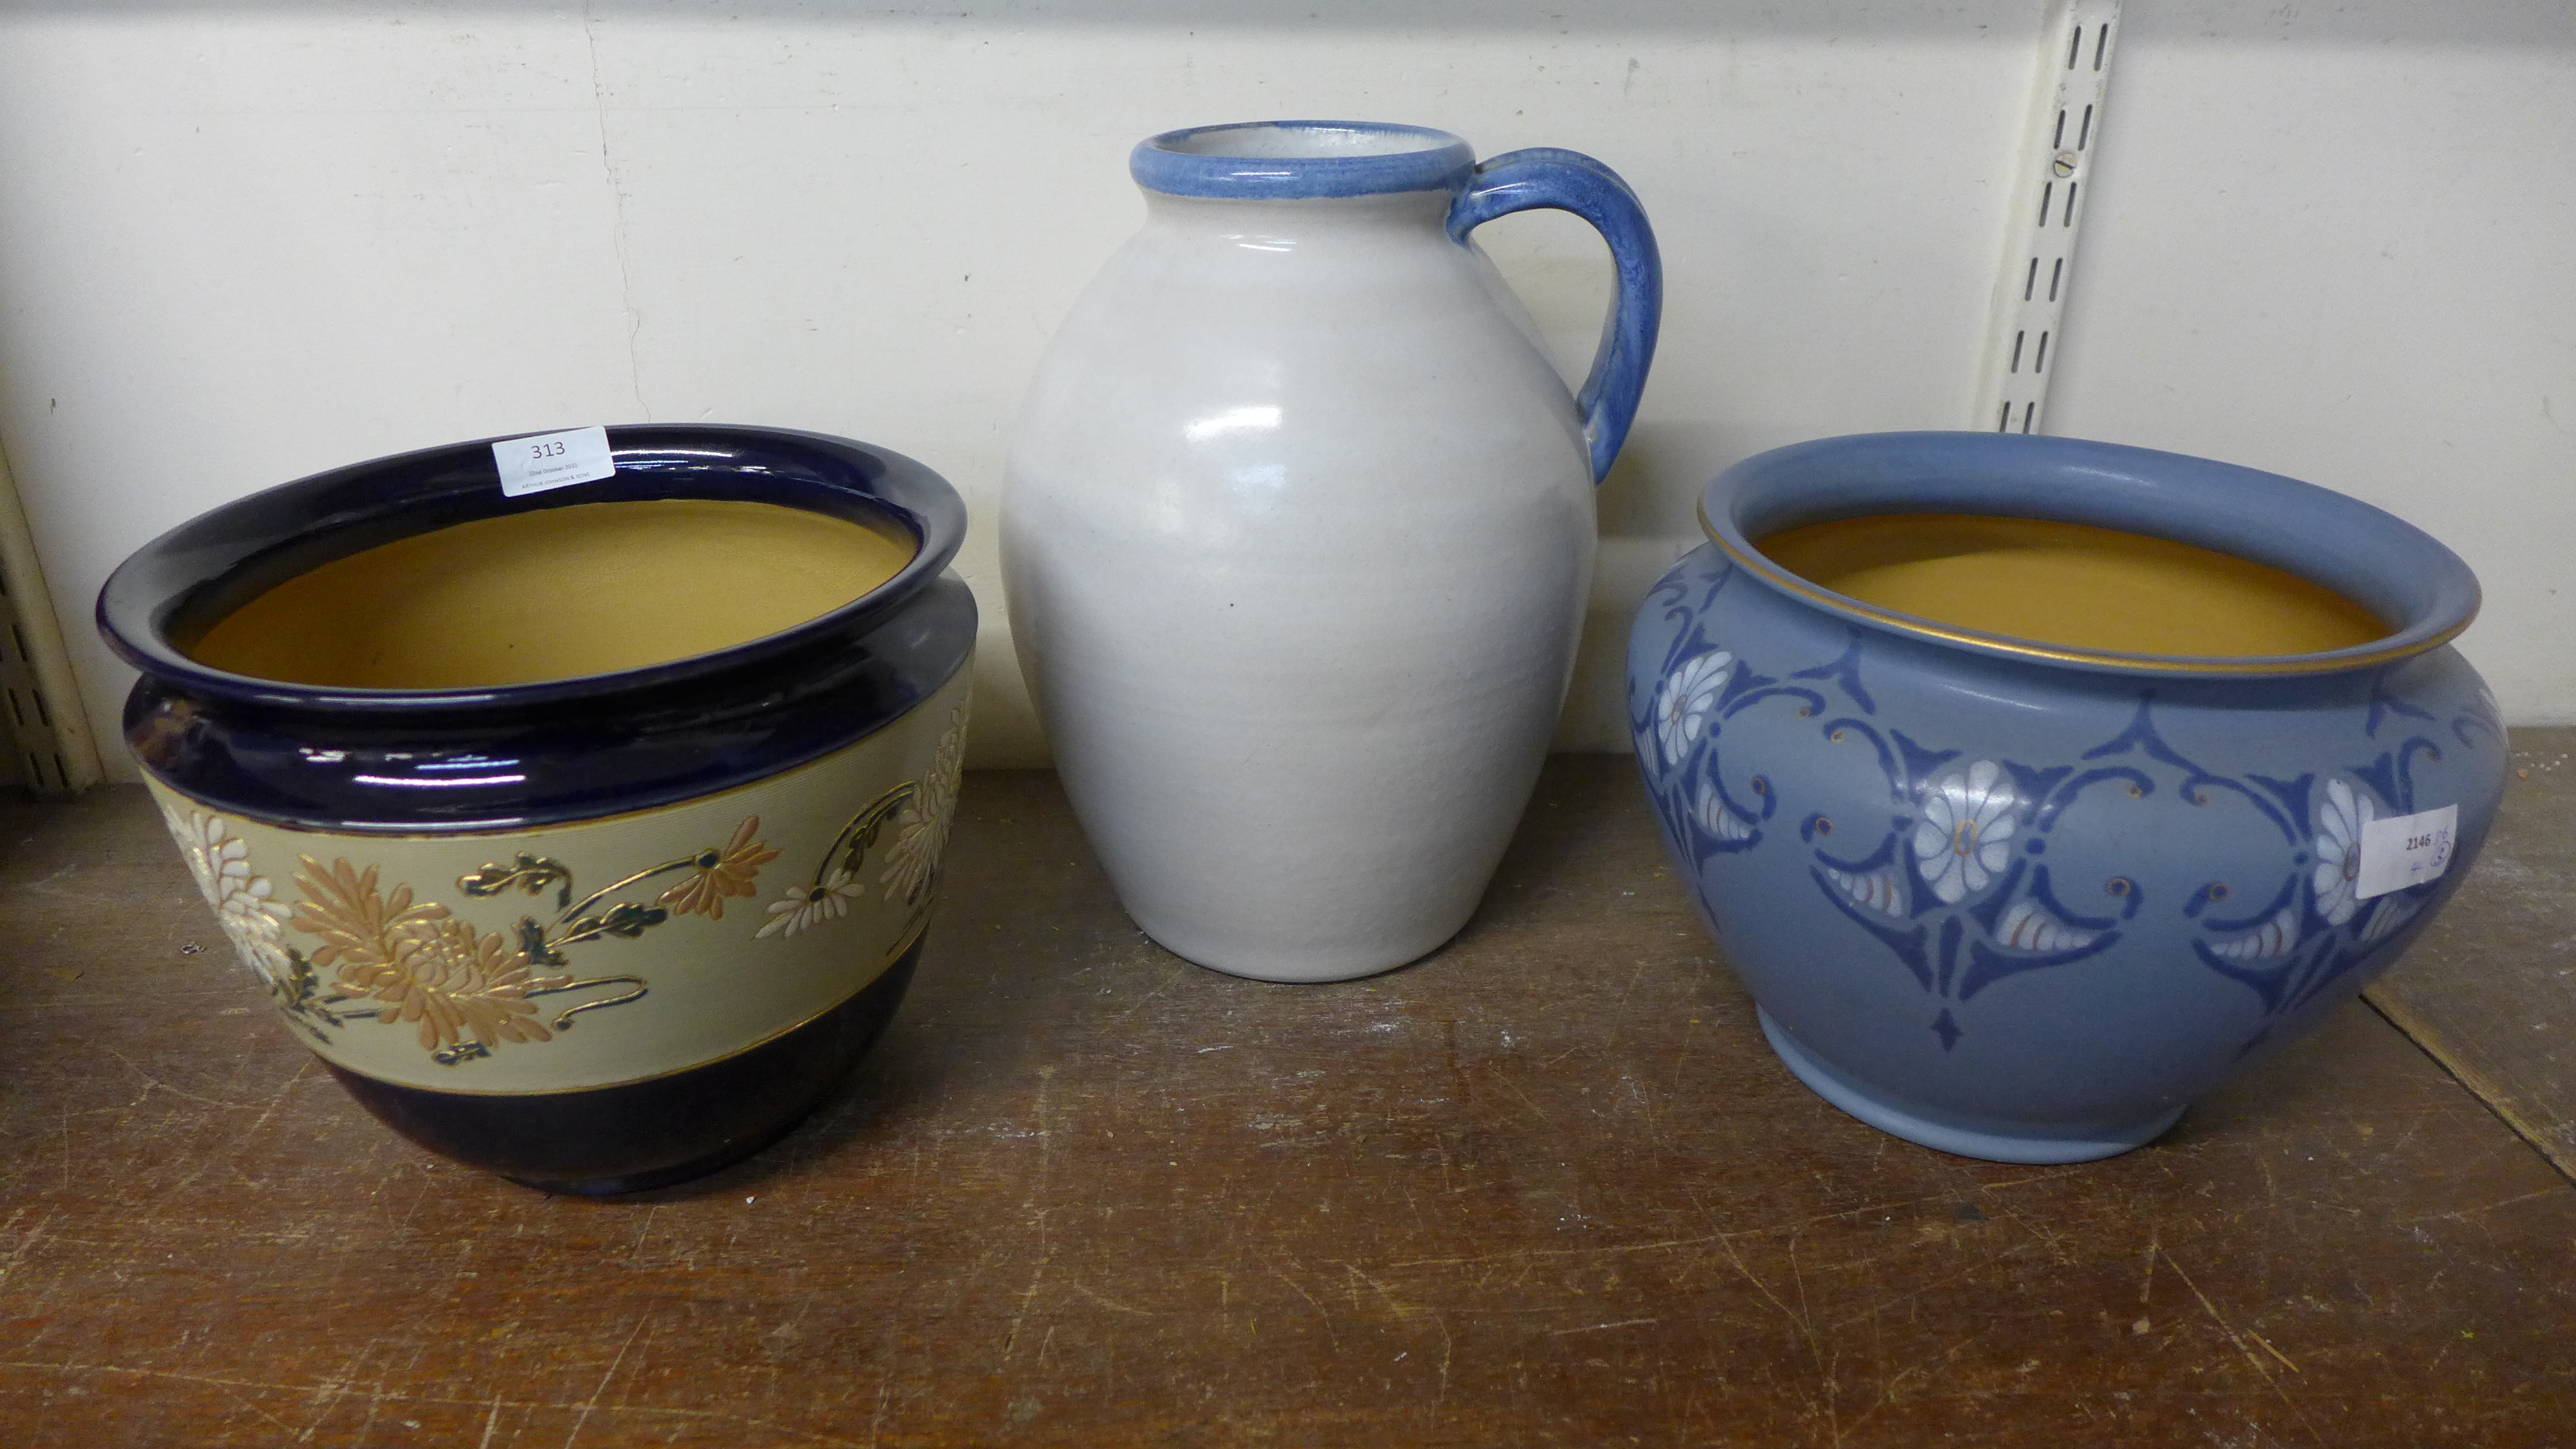 Two Lovatts Langley jardinieres, and a Bourne Denby jug